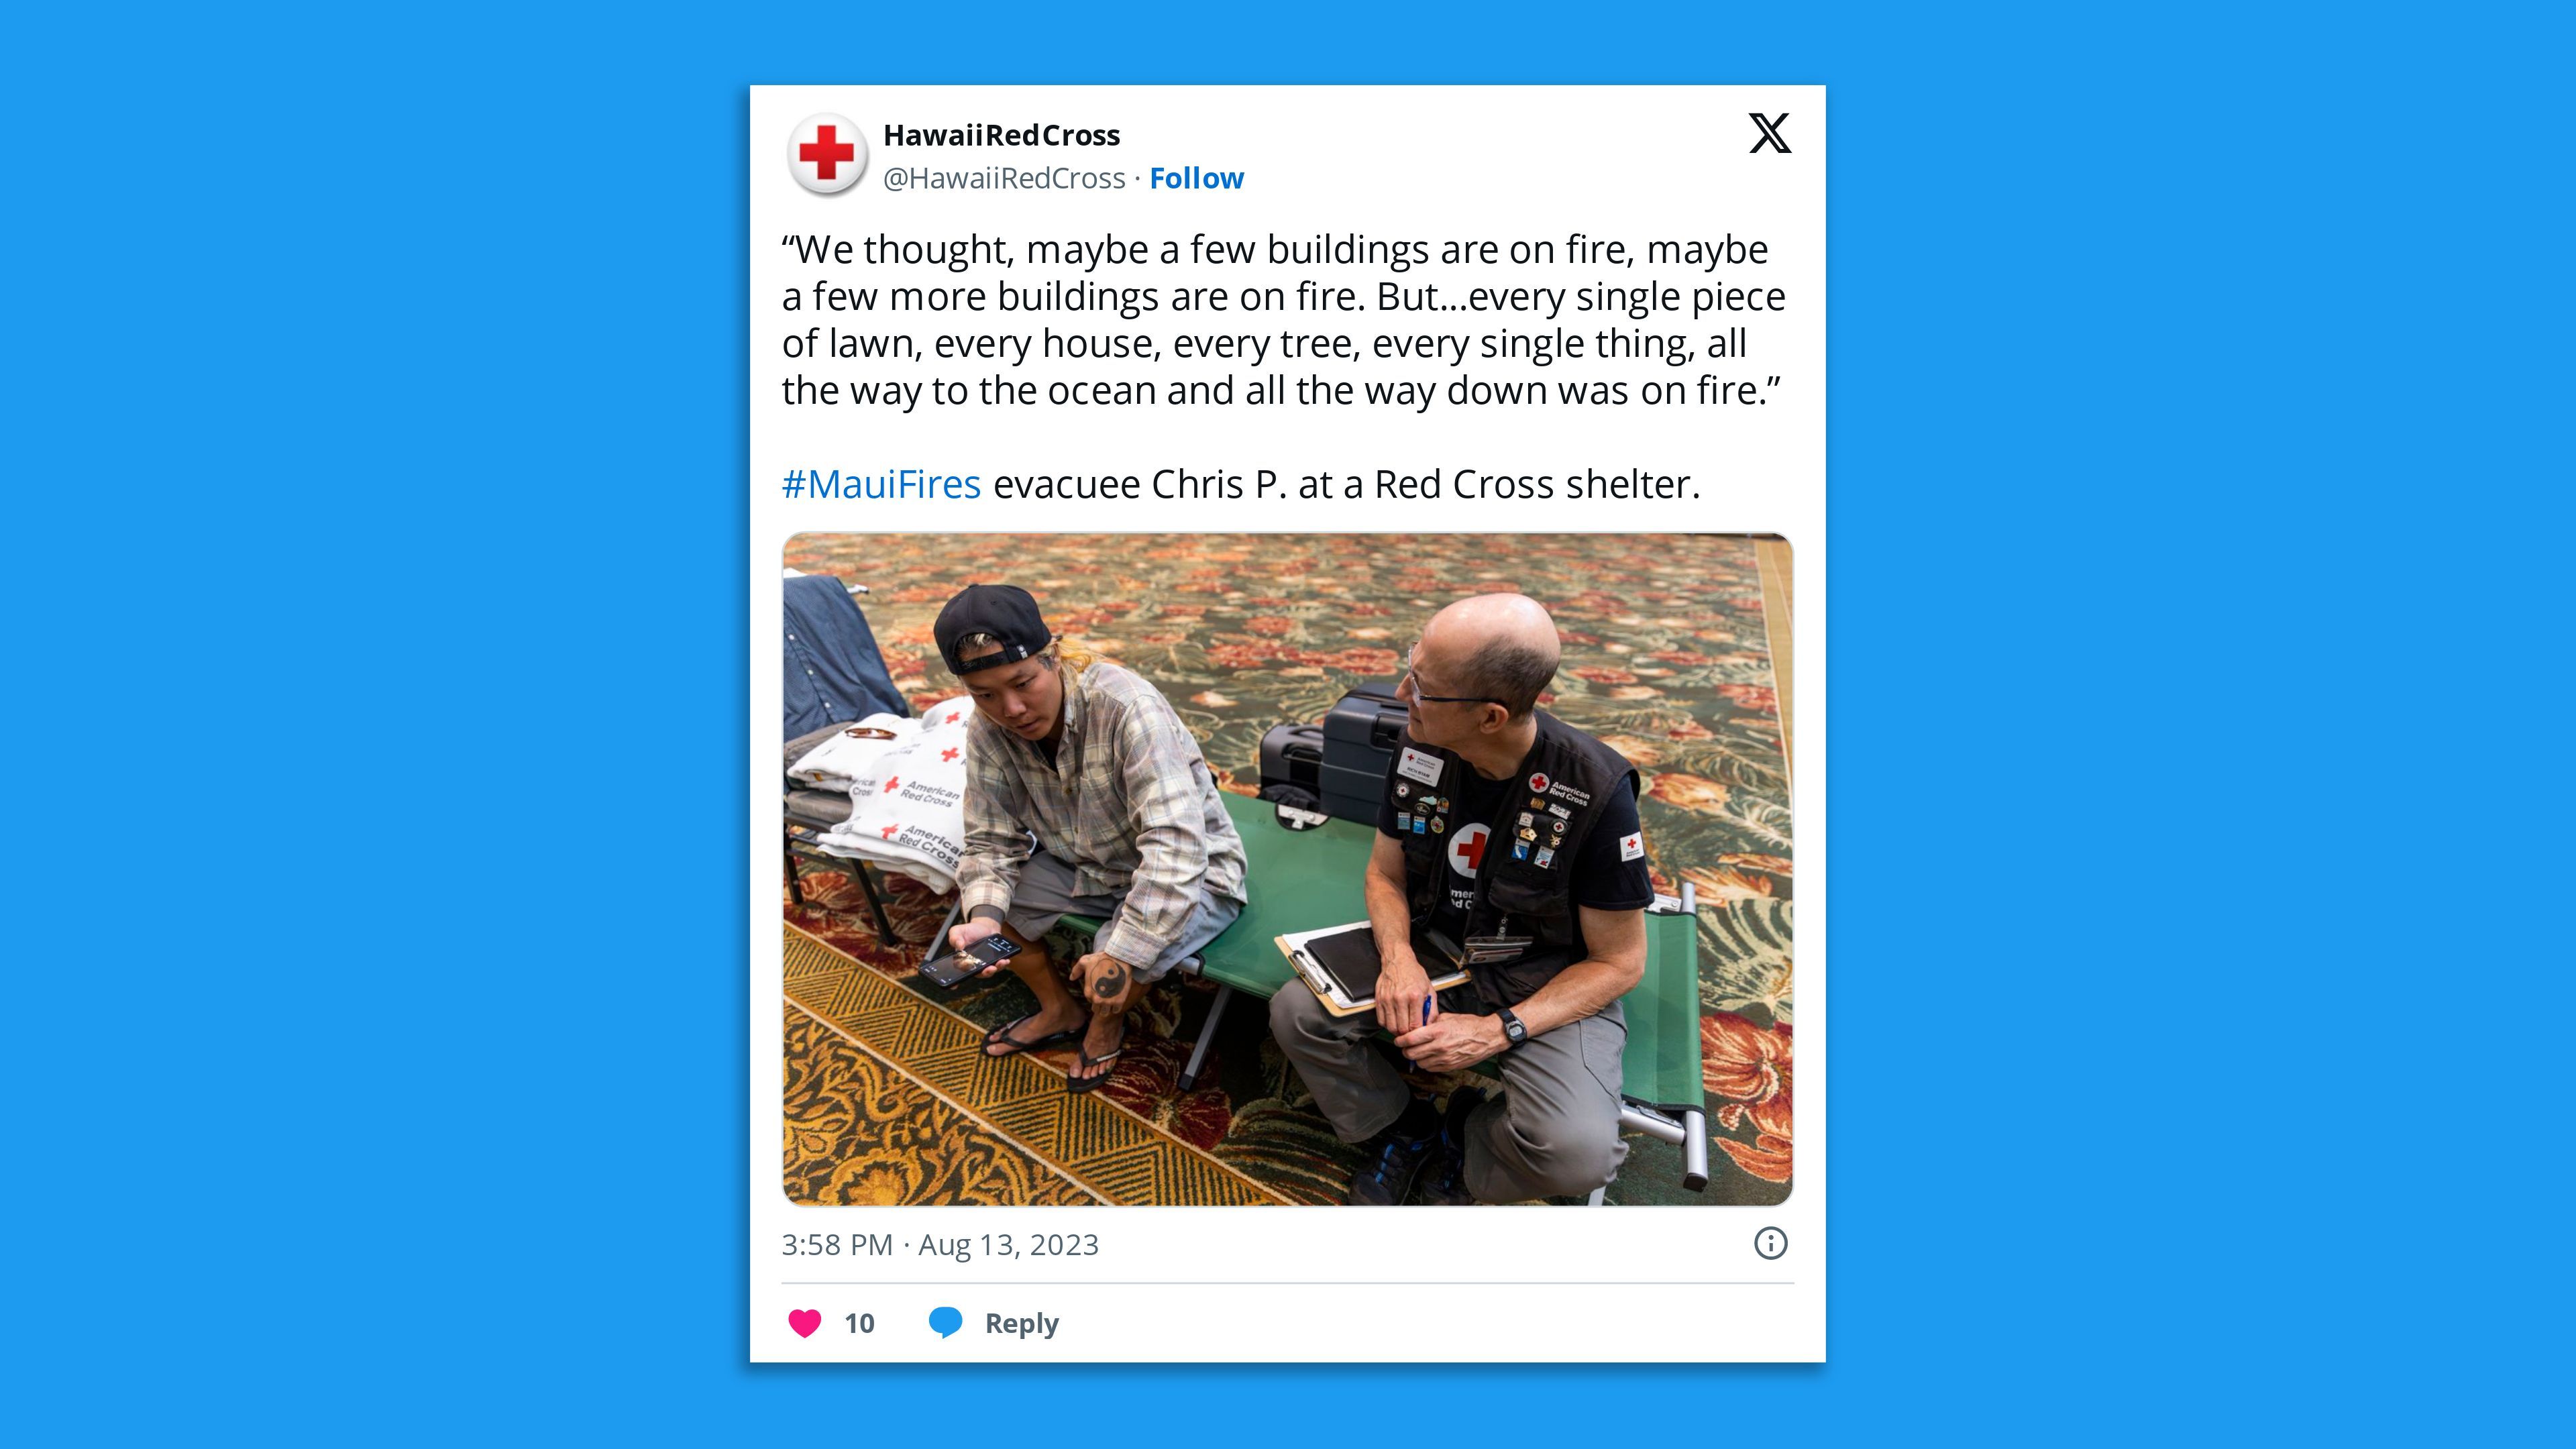 A screenshot of a photo tweet from the Hawaiian Red Cross showing an evacuated Maui County resident with a Red Cross official and the comment: "'We thought, maybe a few buildings are on fire, maybe a few more buildings are on fire. But...every single piece of lawn, every house, every tree, every single thing, all the way to the ocean and all the way down was on fire.' —  #MauiFires evacuee Chris P. at a Red Cross shelter.”